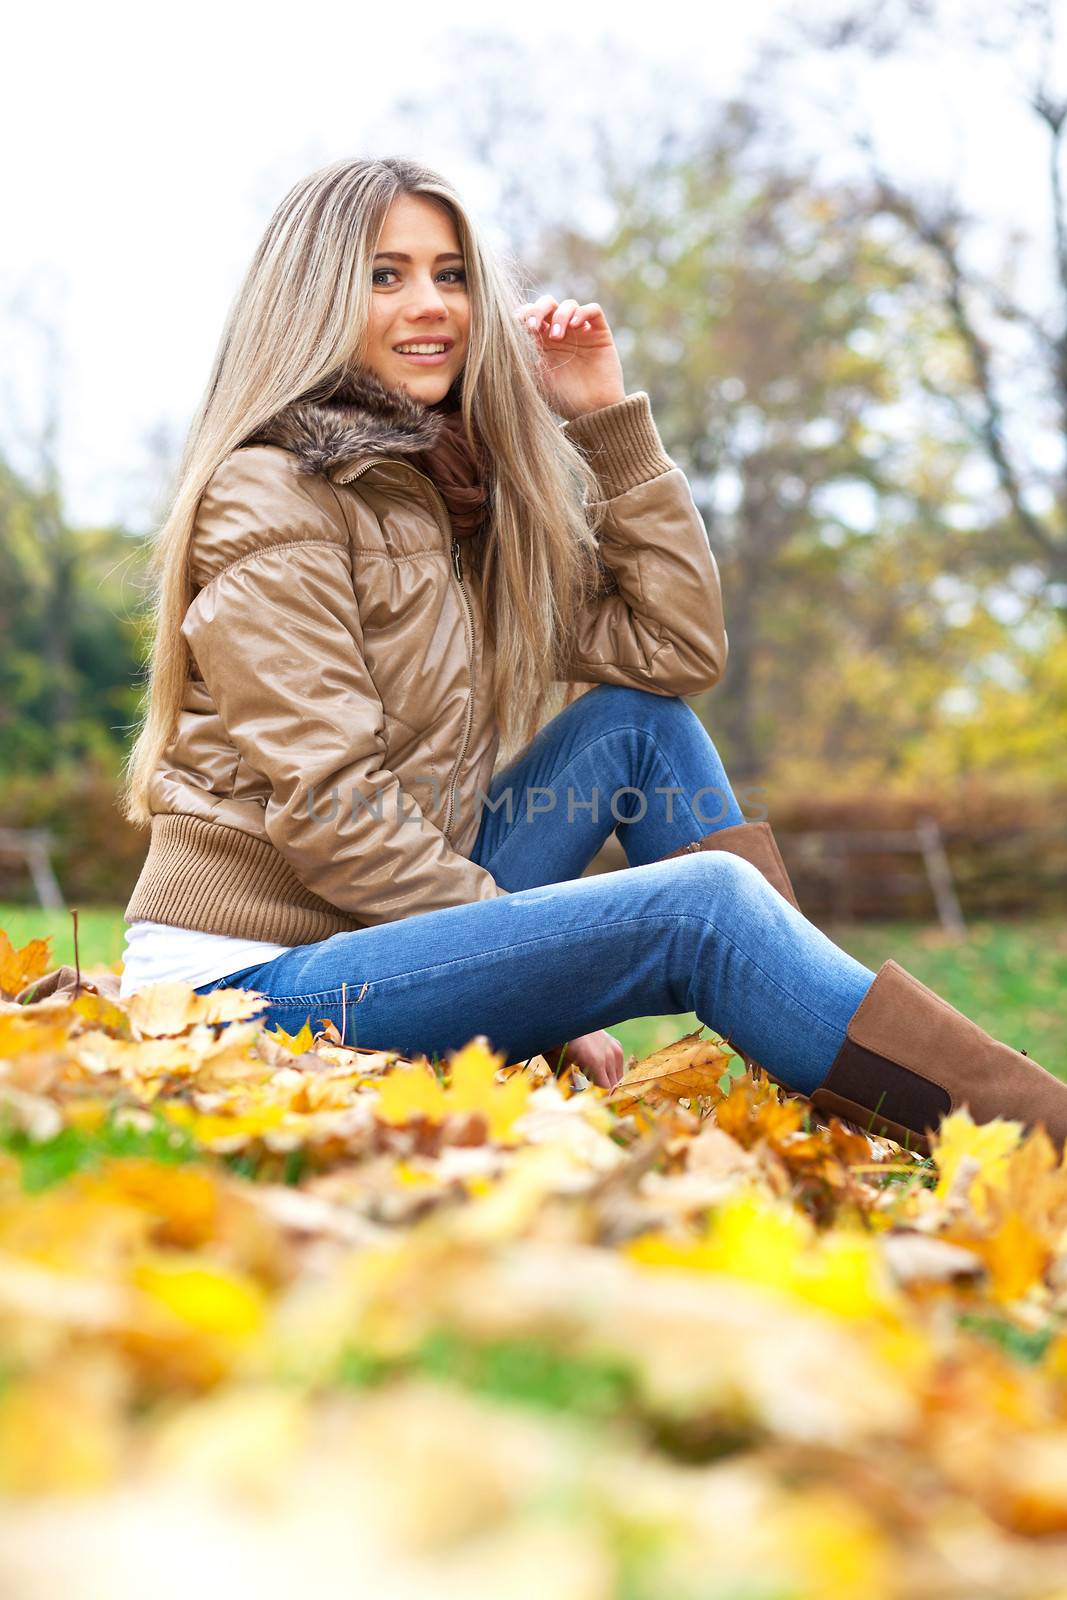 Pretty smiling woman in a park in autumn